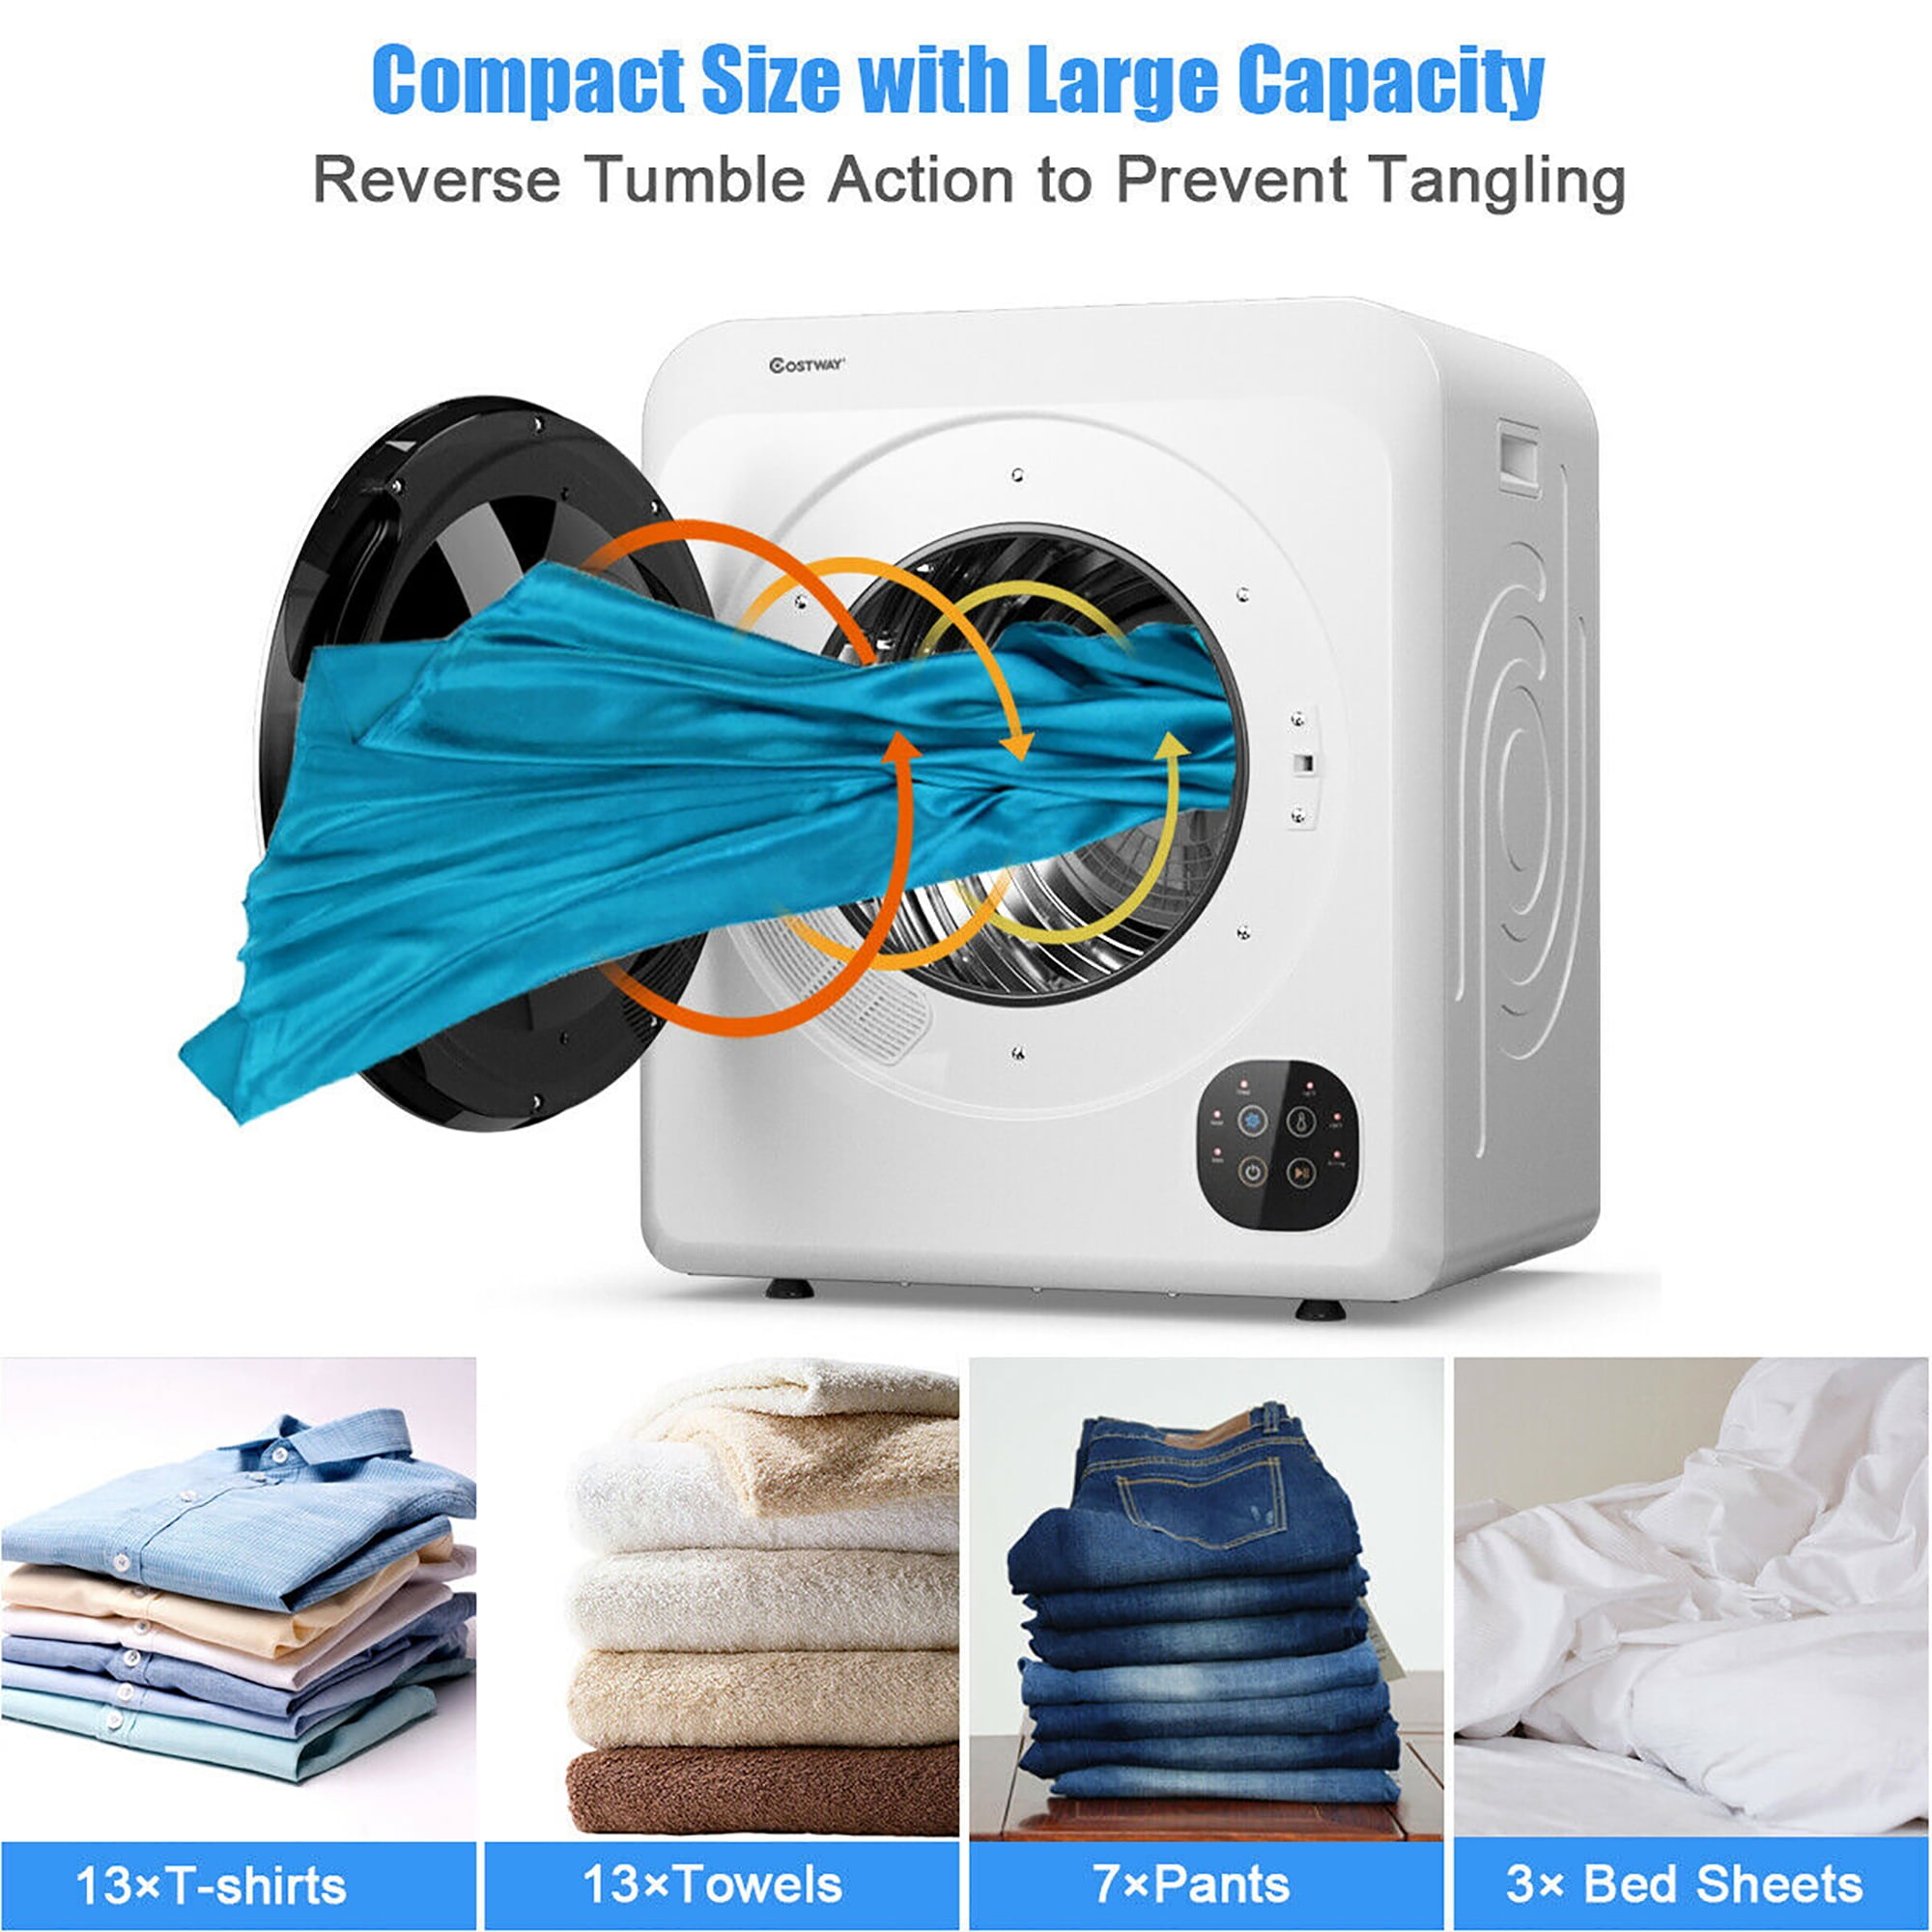 COSTWAY 1700W Electric Portable Clothes Dryer Review, Small but hot 